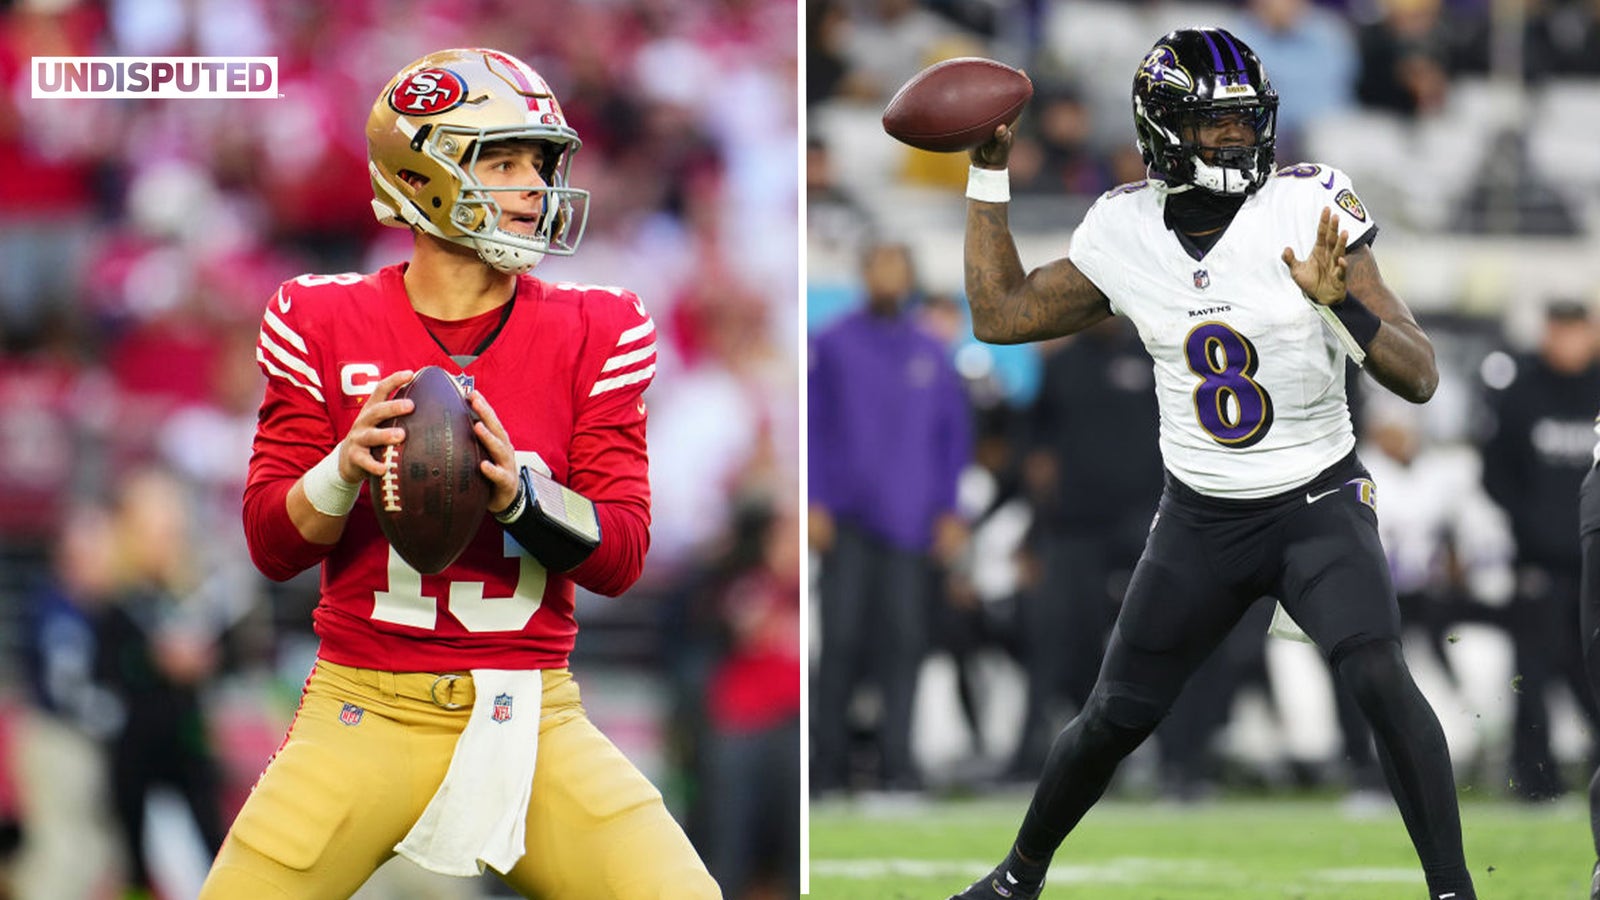 Ravens or 49ers, who is the Super Bowl favorite?